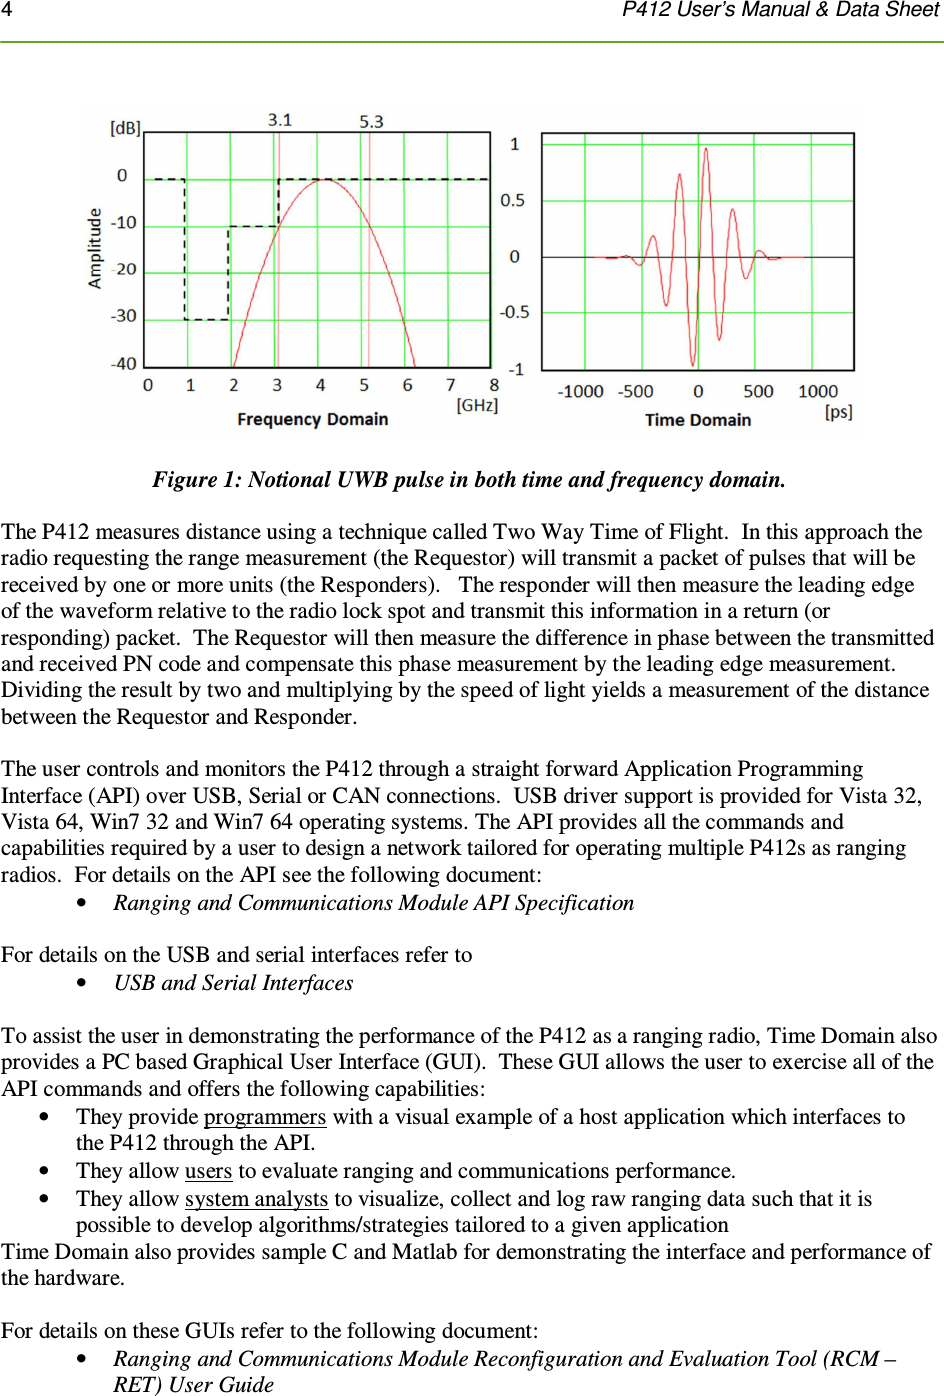 4    P412 User’s Manual &amp; Data Sheet     Figure 1: Notional UWB pulse in both time and frequency domain.  The P412 measures distance using a technique called Two Way Time of Flight.  In this approach the radio requesting the range measurement (the Requestor) will transmit a packet of pulses that will be received by one or more units (the Responders).   The responder will then measure the leading edge of the waveform relative to the radio lock spot and transmit this information in a return (or responding) packet.  The Requestor will then measure the difference in phase between the transmitted and received PN code and compensate this phase measurement by the leading edge measurement.  Dividing the result by two and multiplying by the speed of light yields a measurement of the distance between the Requestor and Responder.  The user controls and monitors the P412 through a straight forward Application Programming Interface (API) over USB, Serial or CAN connections.  USB driver support is provided for Vista 32, Vista 64, Win7 32 and Win7 64 operating systems. The API provides all the commands and capabilities required by a user to design a network tailored for operating multiple P412s as ranging radios.  For details on the API see the following document: • Ranging and Communications Module API Specification  For details on the USB and serial interfaces refer to • USB and Serial Interfaces  To assist the user in demonstrating the performance of the P412 as a ranging radio, Time Domain also provides a PC based Graphical User Interface (GUI).  These GUI allows the user to exercise all of the API commands and offers the following capabilities: • They provide programmers with a visual example of a host application which interfaces to the P412 through the API. • They allow users to evaluate ranging and communications performance. • They allow system analysts to visualize, collect and log raw ranging data such that it is possible to develop algorithms/strategies tailored to a given application Time Domain also provides sample C and Matlab for demonstrating the interface and performance of the hardware.  For details on these GUIs refer to the following document: • Ranging and Communications Module Reconfiguration and Evaluation Tool (RCM –RET) User Guide  